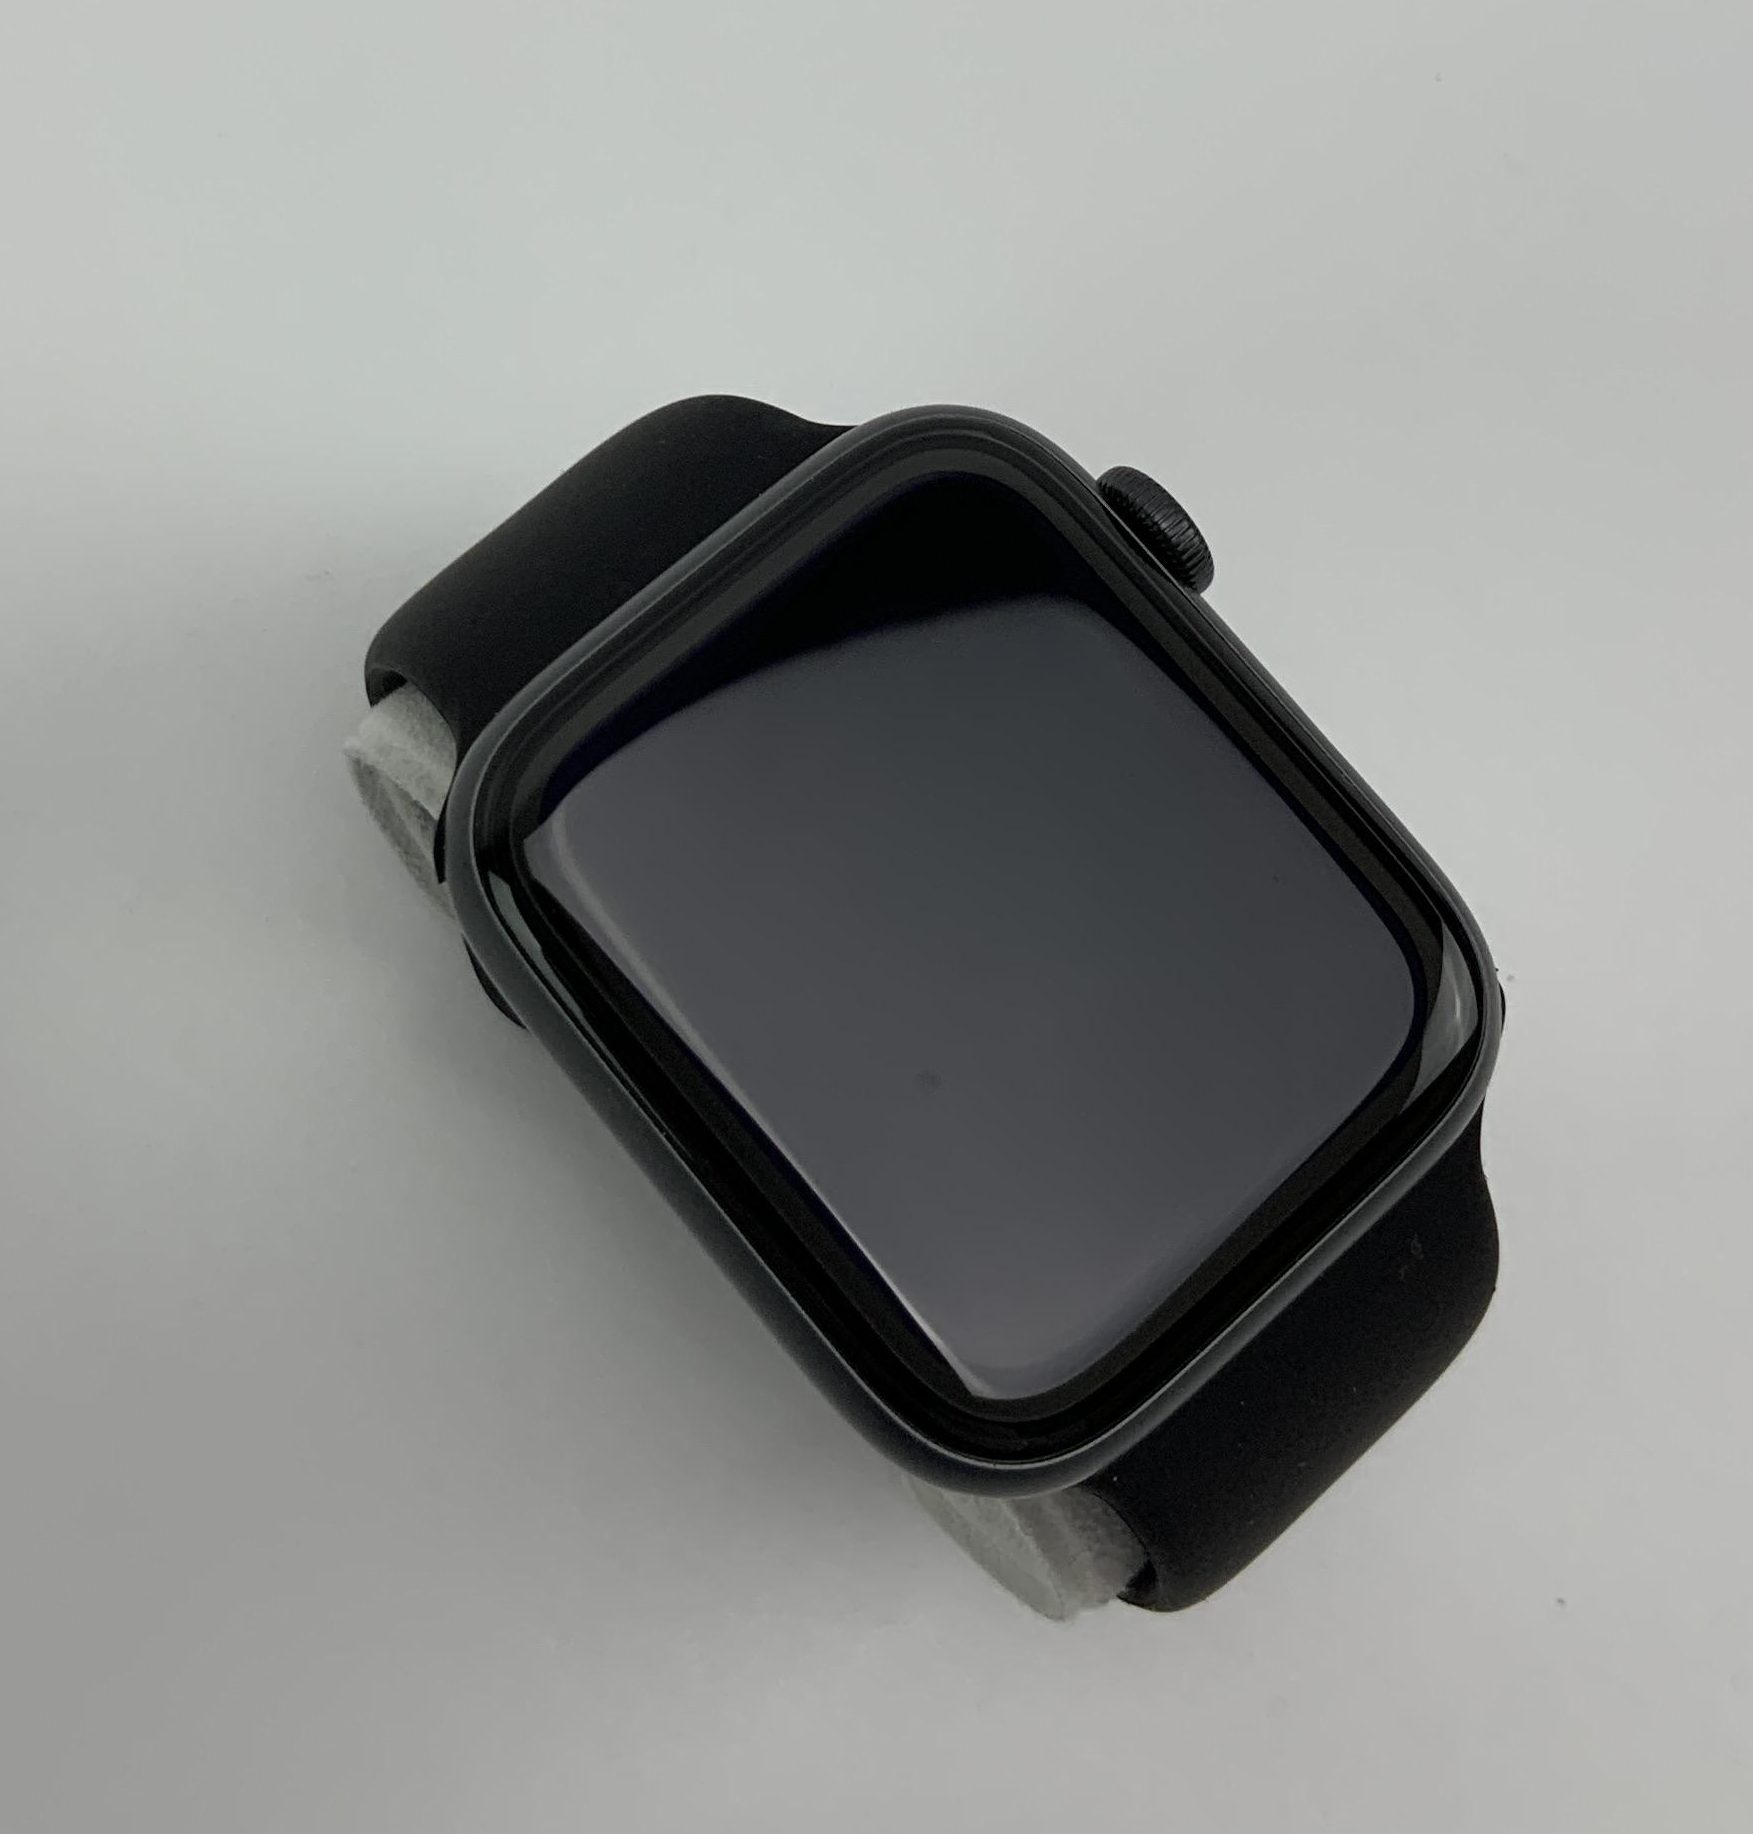 Watch Series 5 Aluminum Cellular (44mm), Space Gray, image 3